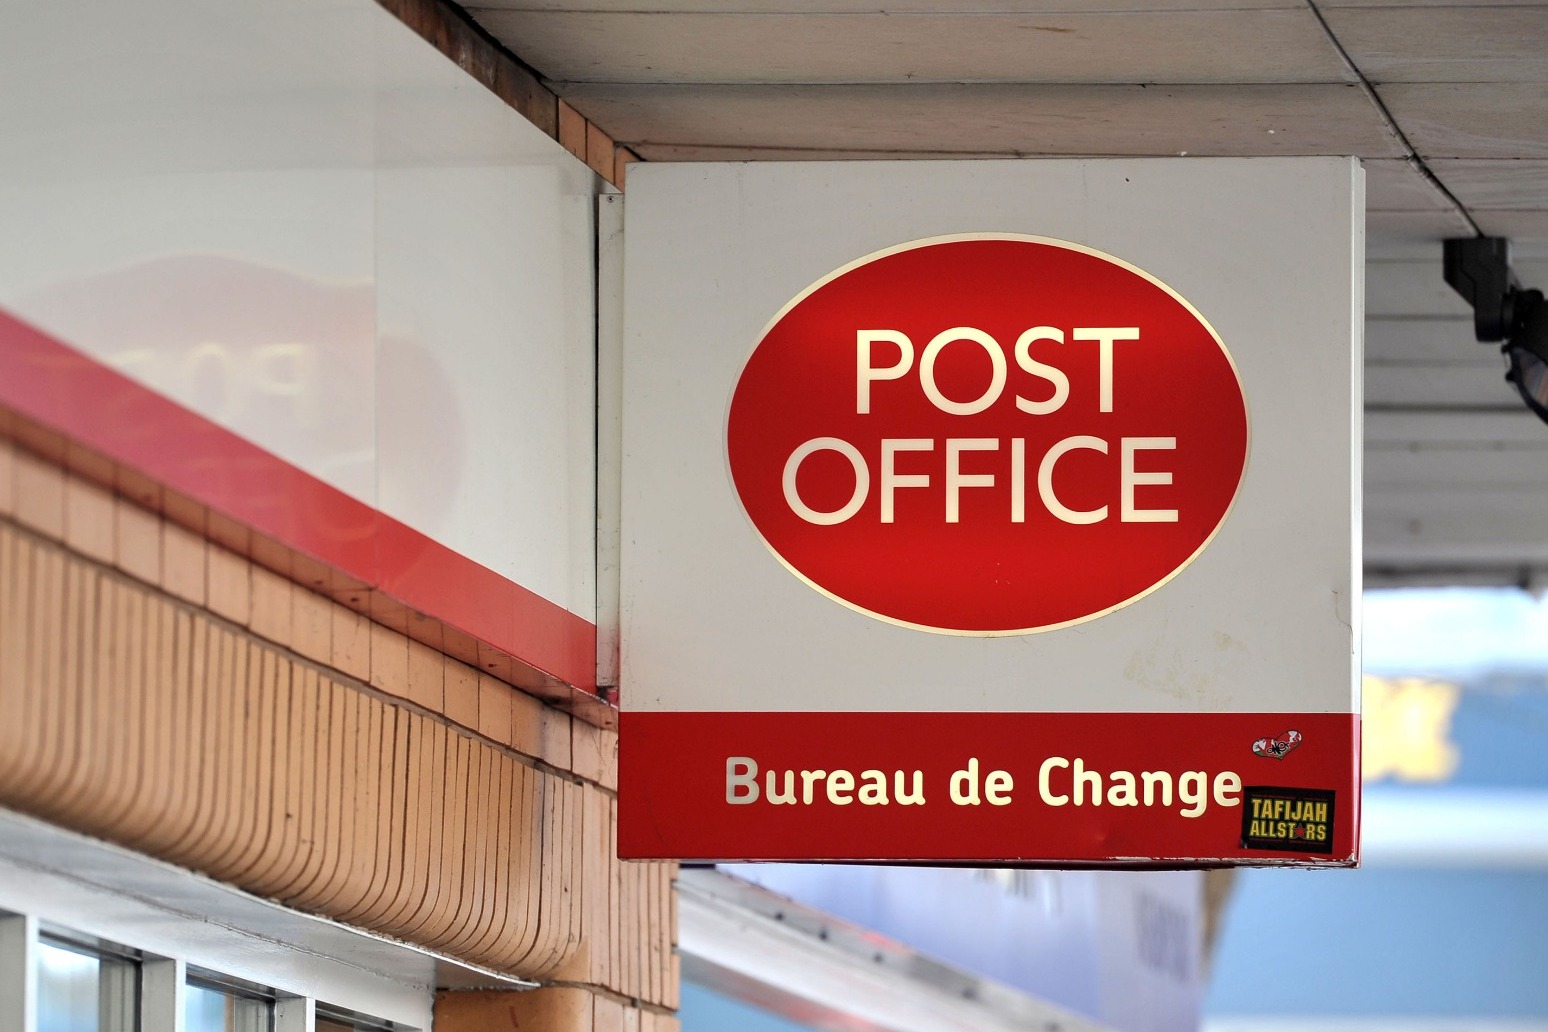 MPs demand Government ‘fully compensates’ all victims of Post Office scandal 